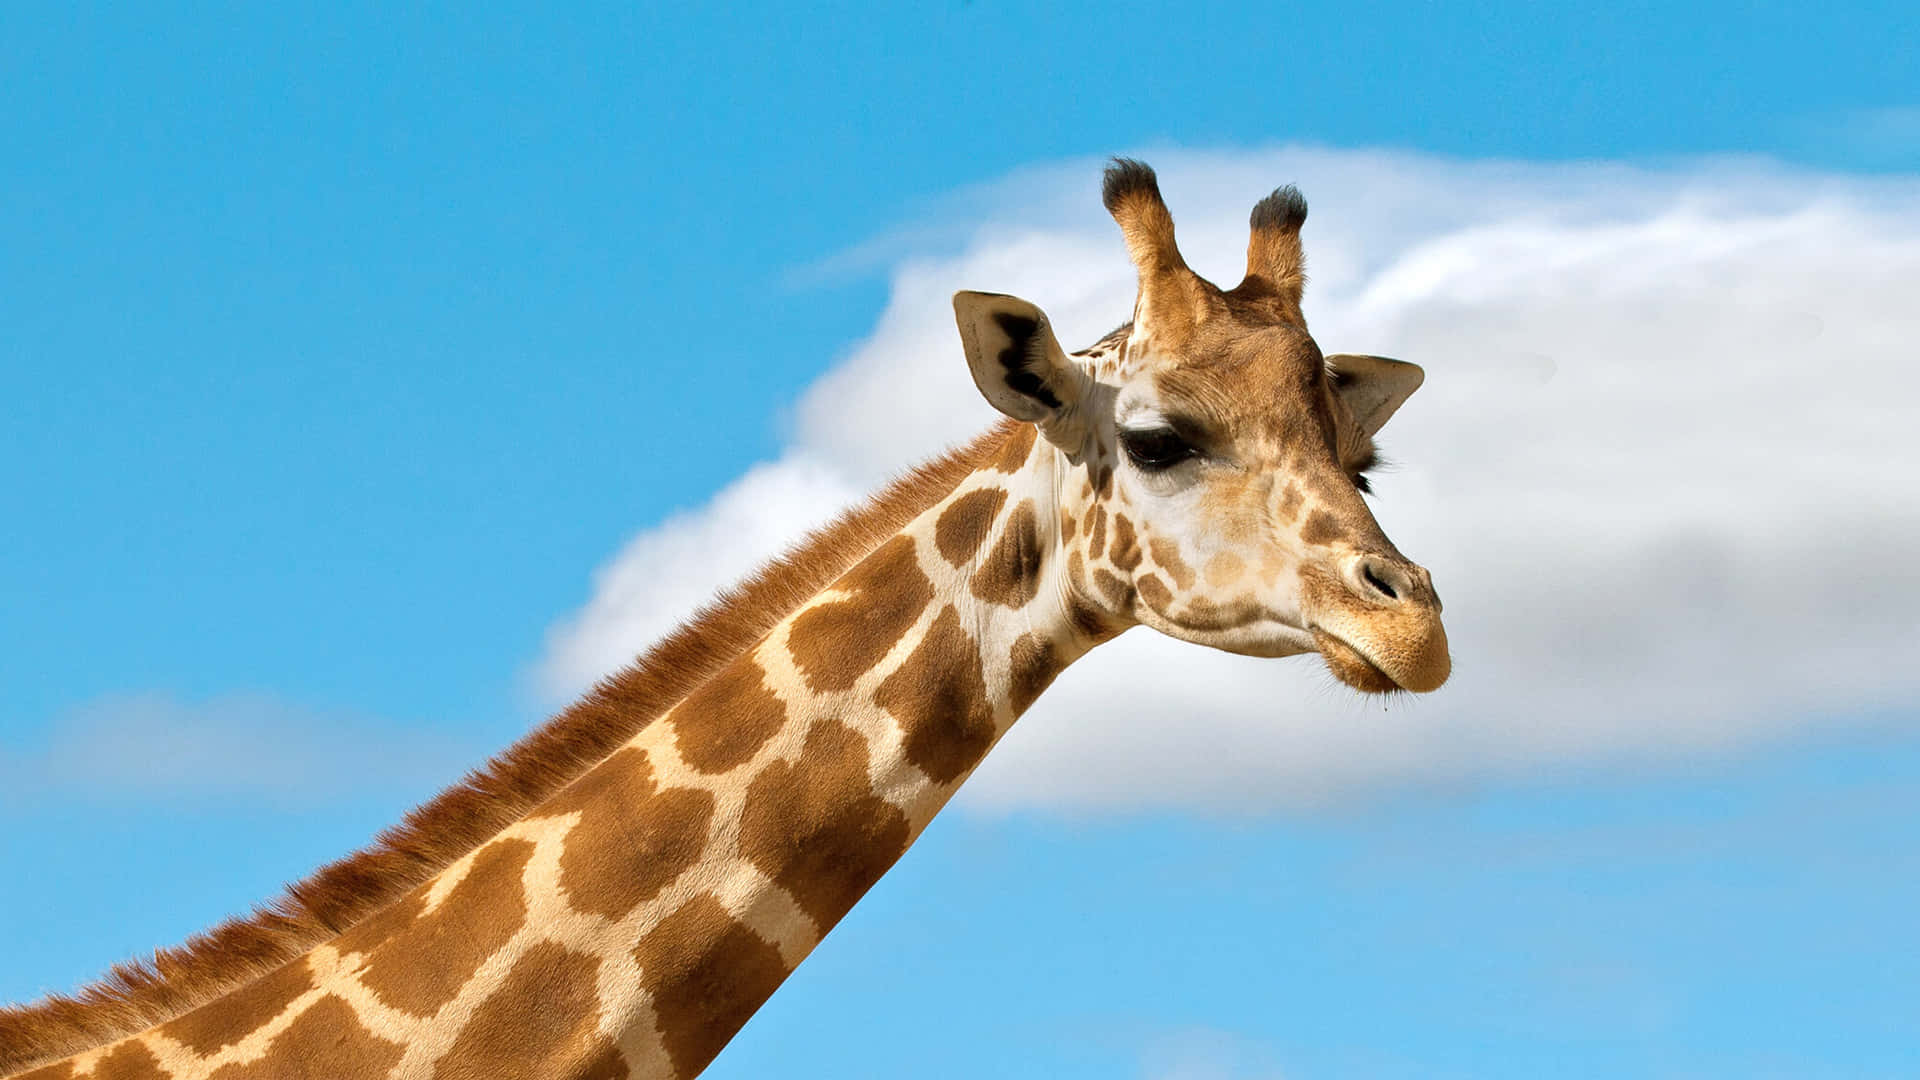 Image  Gentle Giant - A Relaxed Giraffe Staring Into The Distance